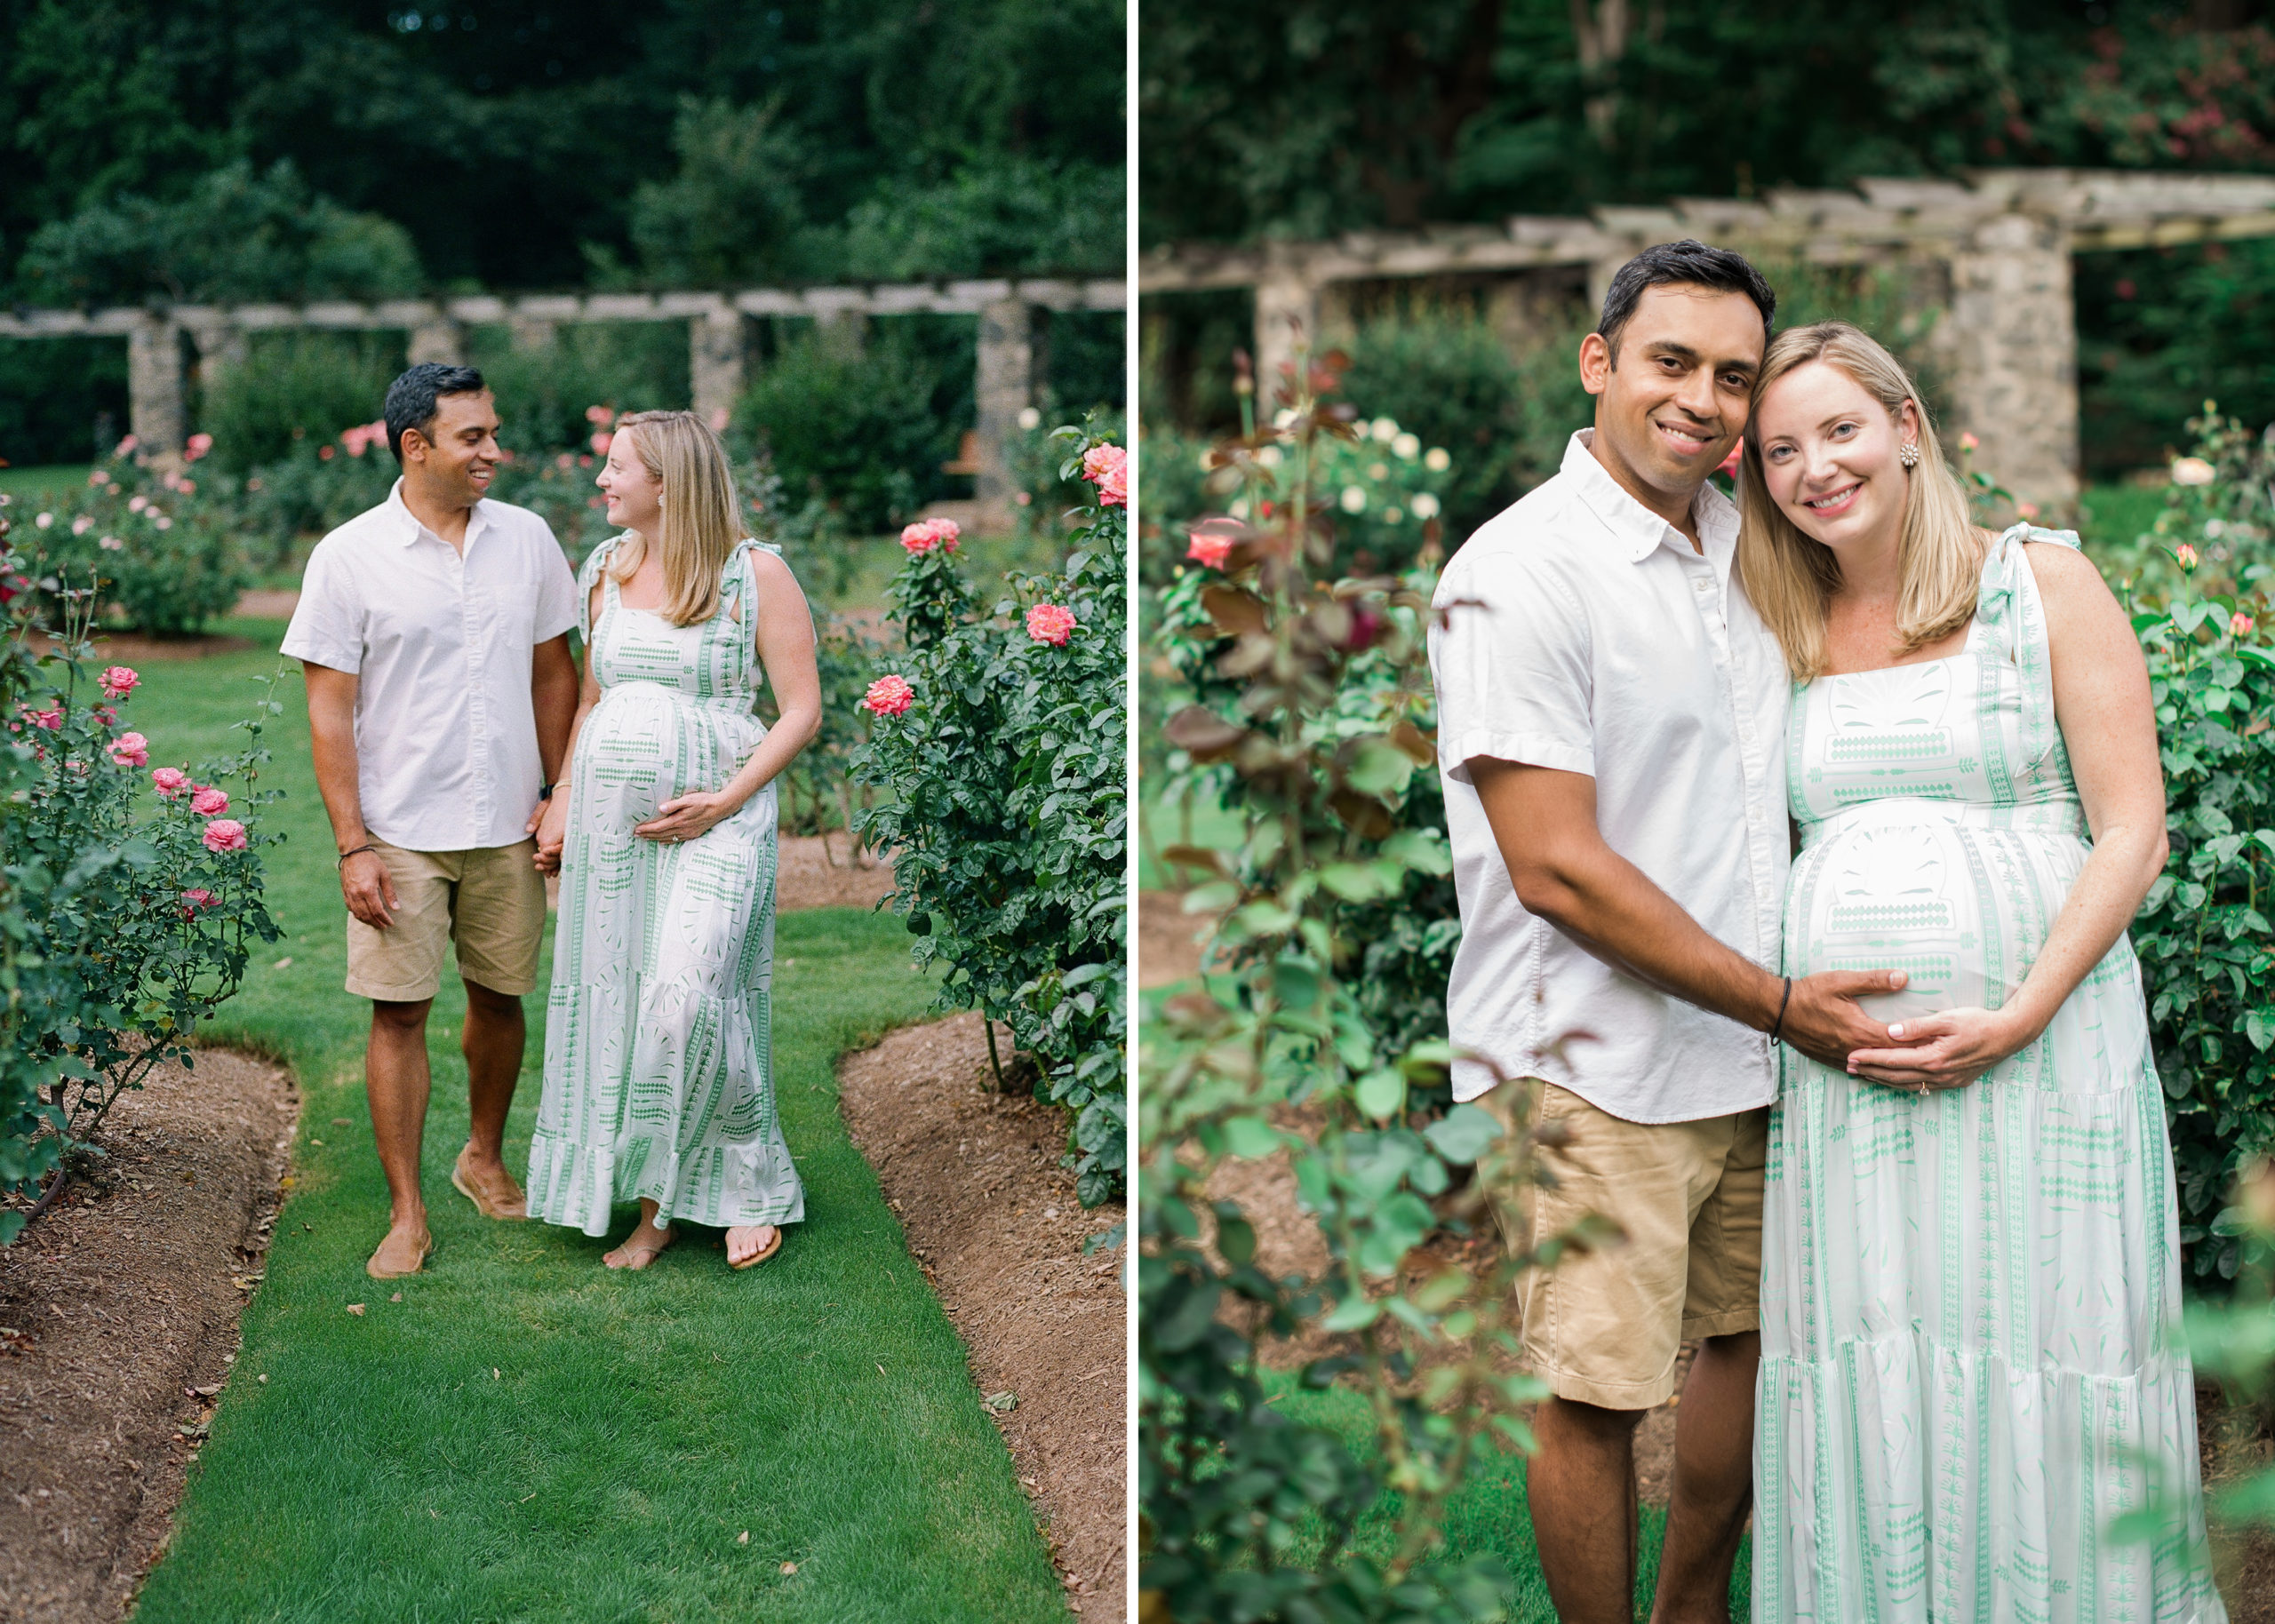 Raleigh rose garden maternity photography session